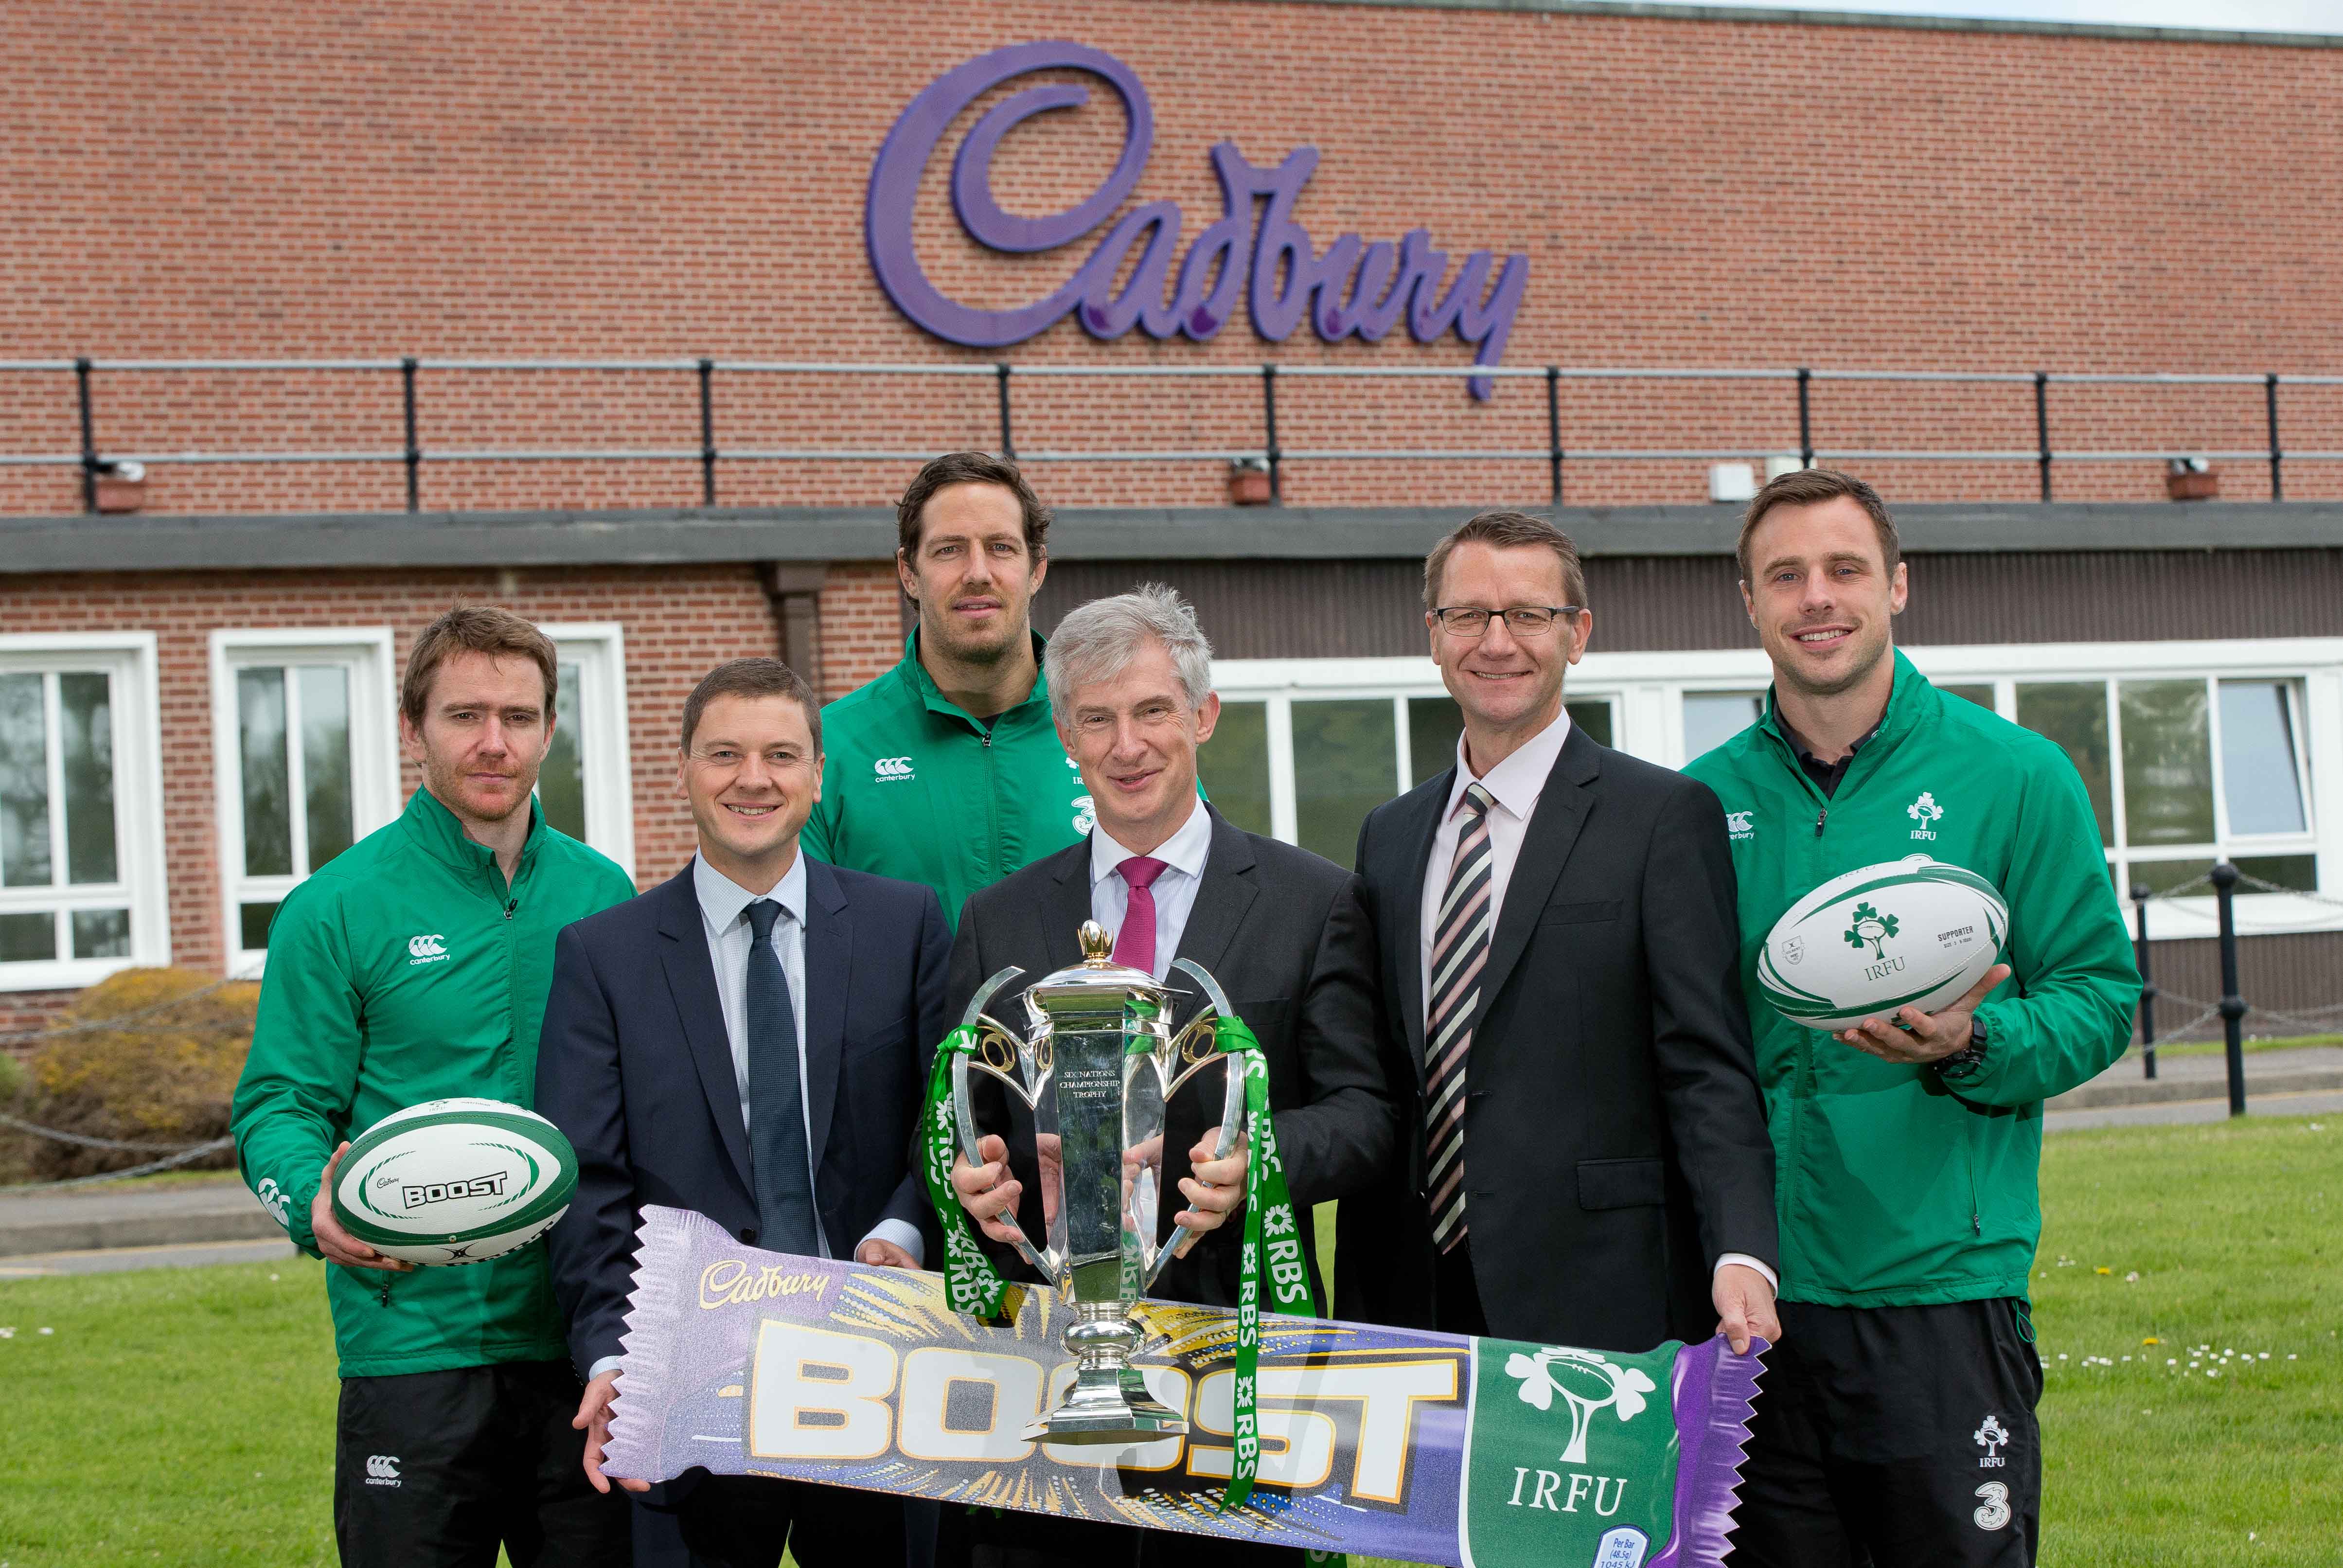 Irish rugby players Eoin Reddan, Mike McCarthy and Tommy Bowe were joined by Eoin Kellett, sales director of Mondelez Ireland, Willie O’Byrne, managing director of BWG Foods and Simon Marriott, trading director of BWG Foods at the Cadbury factory, Coolock, as Cadbury Boost is unveiled as the official chocolate bar to the IRFU